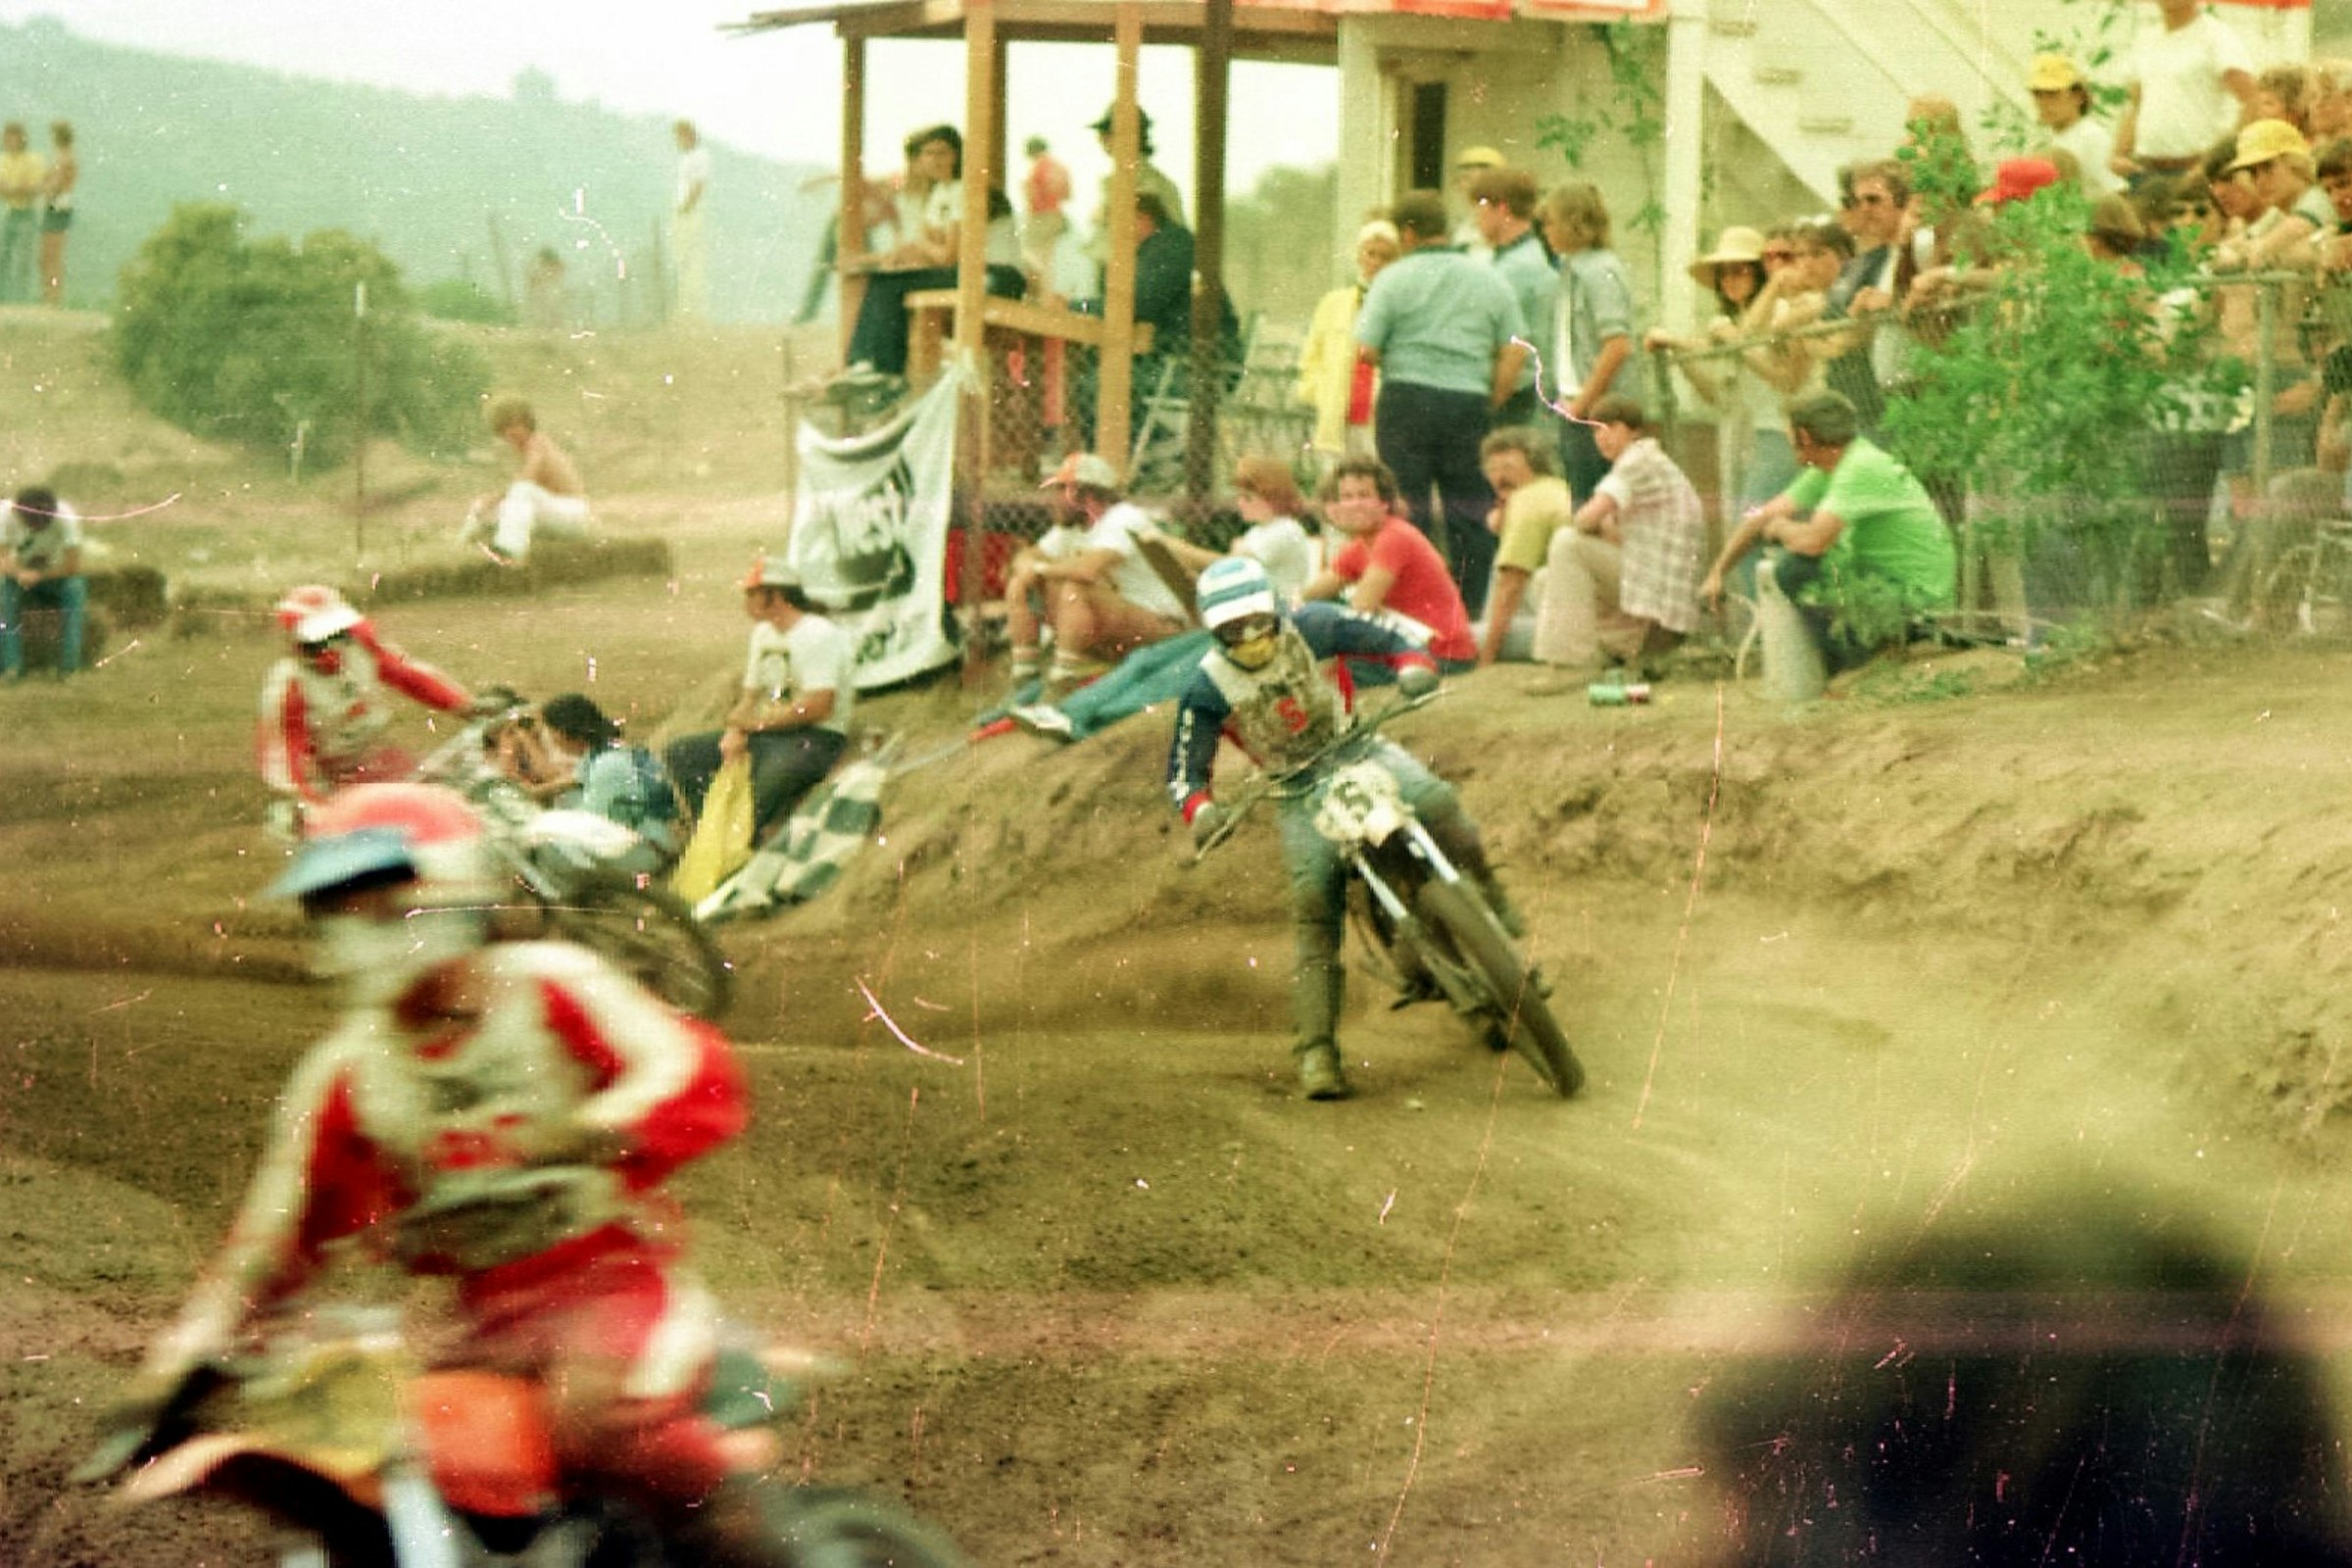 AMA Amateur/Minicycle Nationals Results Before Loretta Lynns (1973-1981)